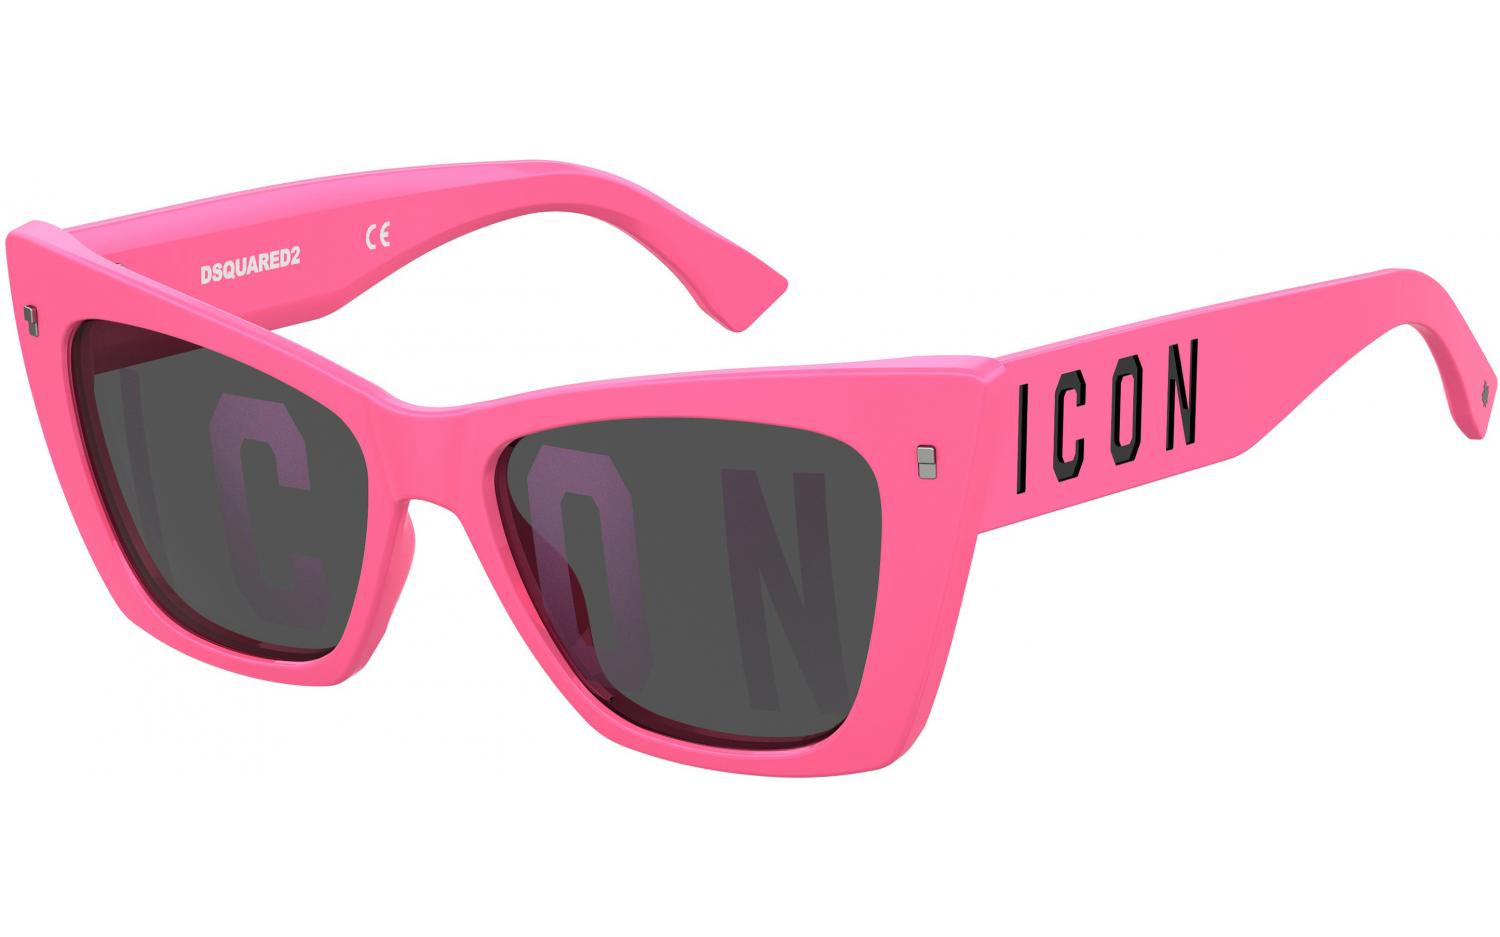 DSQUARED2 ICON 0006/S 35J 01 53 Sunglasses | Shade Station